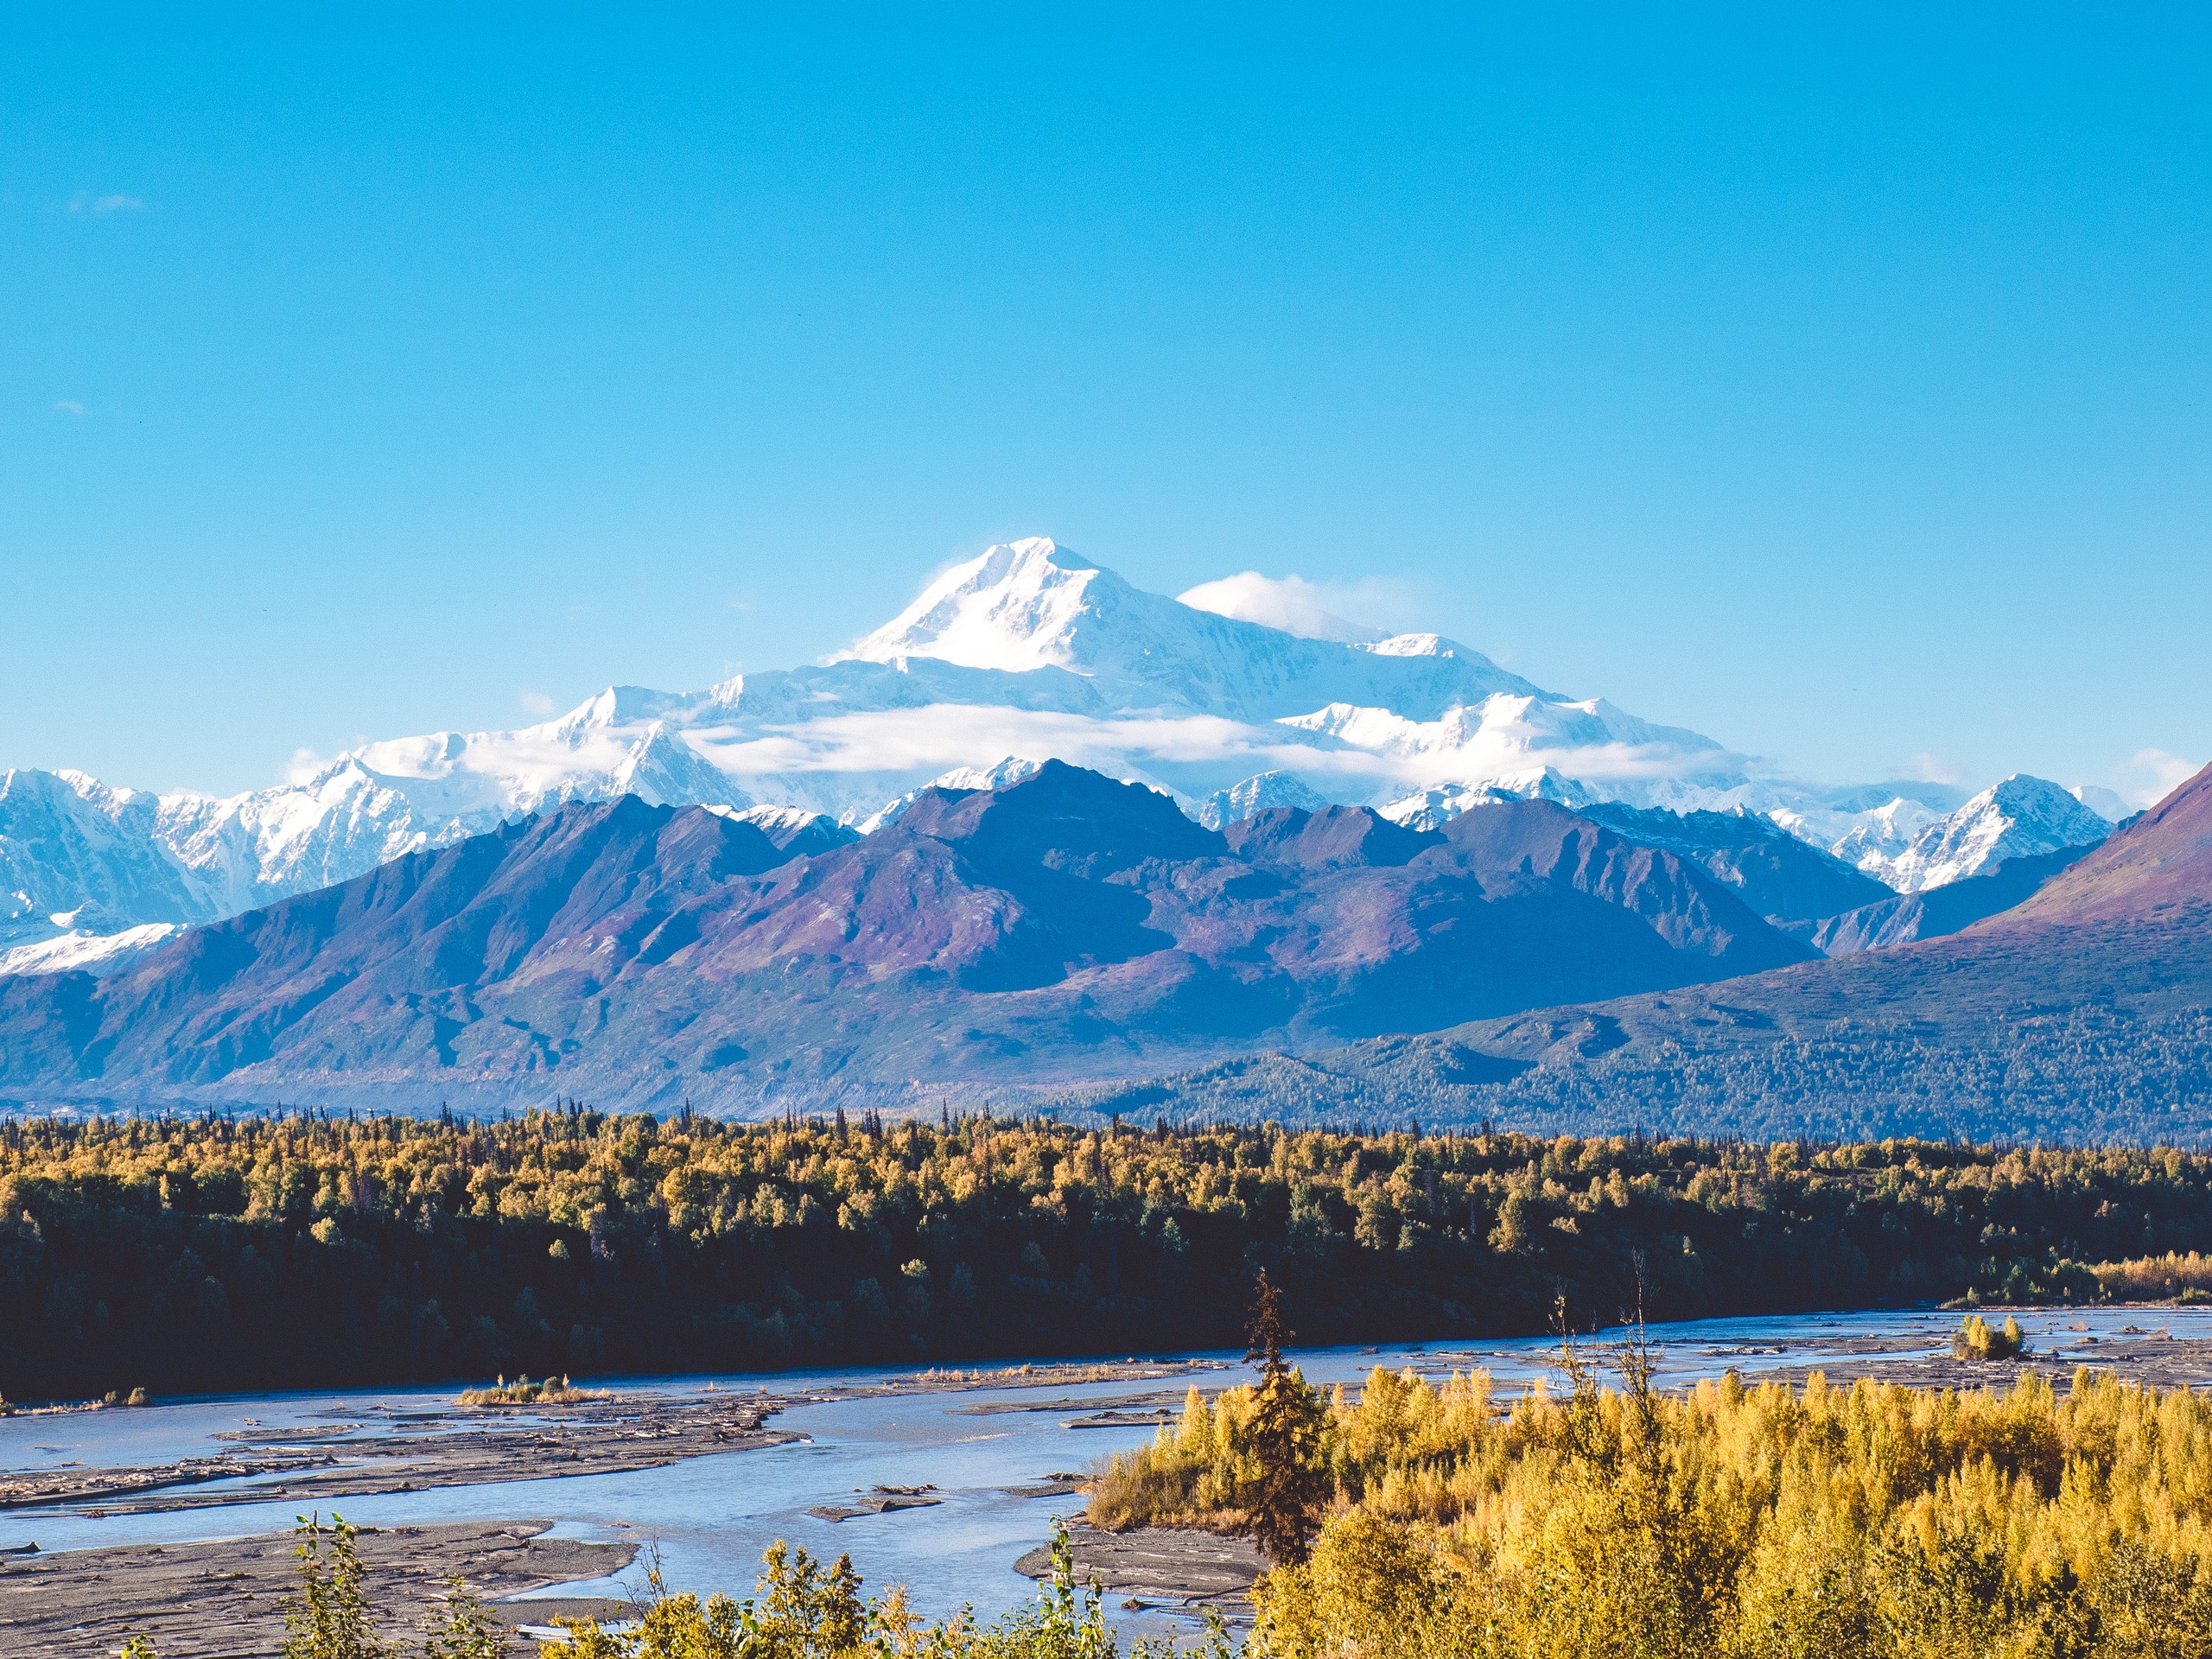 Beautiful river in Alaska with Mount Denali in the background